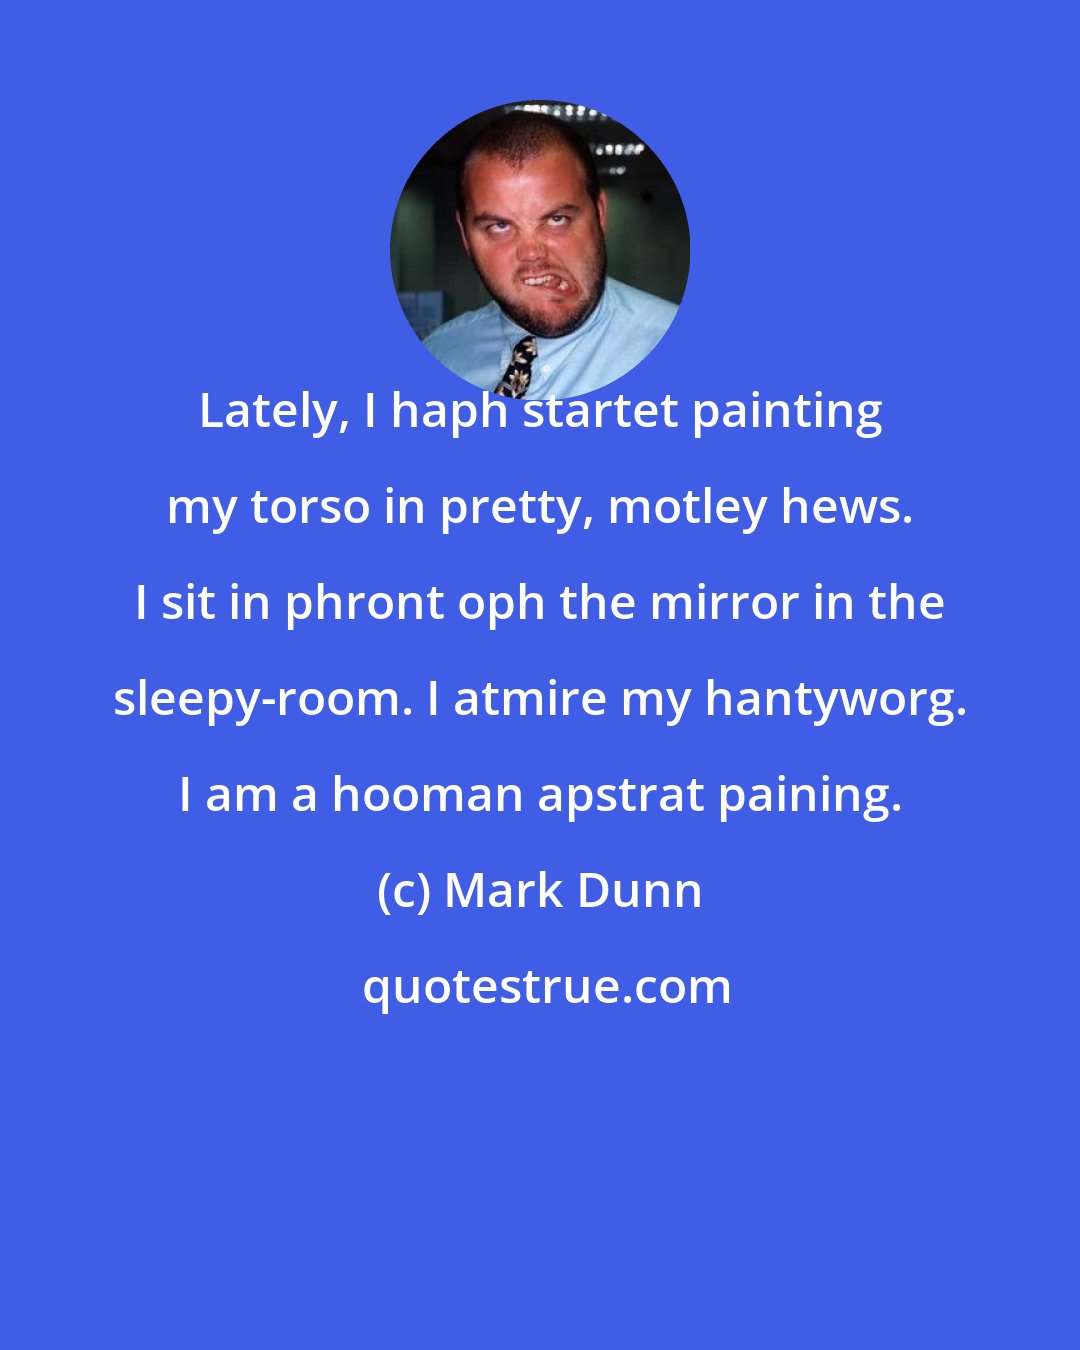 Mark Dunn: Lately, I haph startet painting my torso in pretty, motley hews. I sit in phront oph the mirror in the sleepy-room. I atmire my hantyworg. I am a hooman apstrat paining.